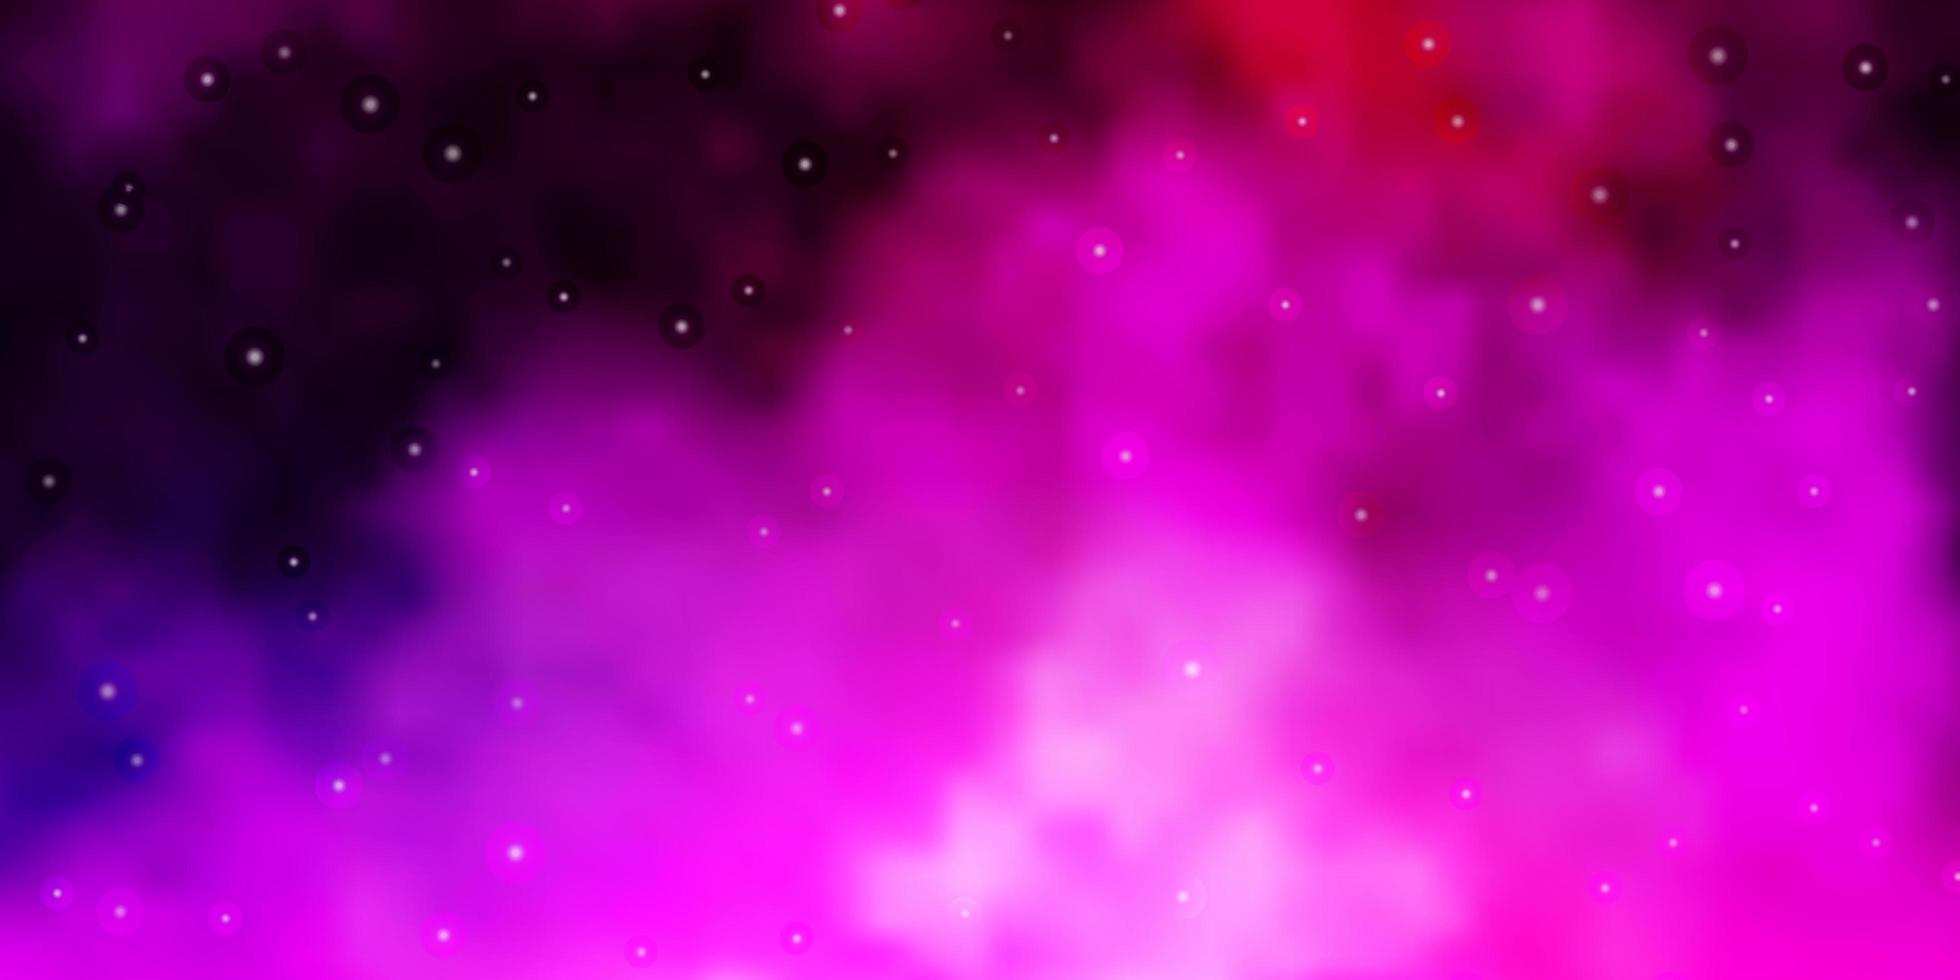 Light Purple, Pink vector template with neon stars.